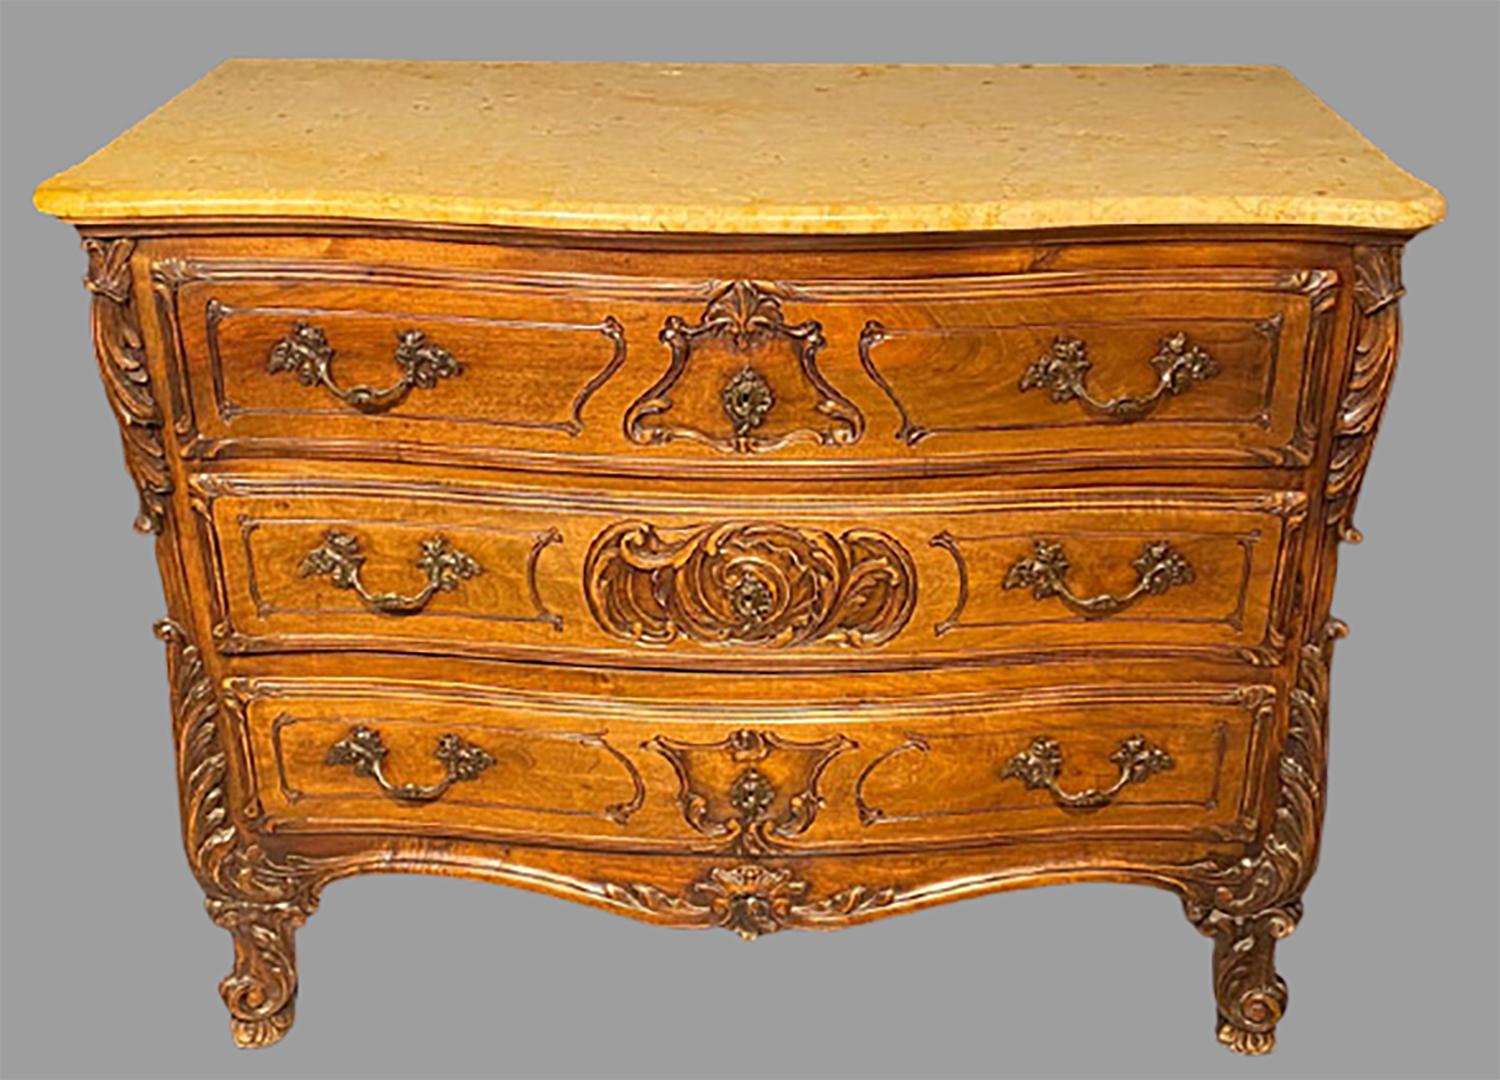 Marble top commode, chest or dresser in the Louis XV style dating from the late 19th century. This large and impressive commode is magnificently carved in the Rococo taste sporting a finely designed marble top. The front and back column sides are